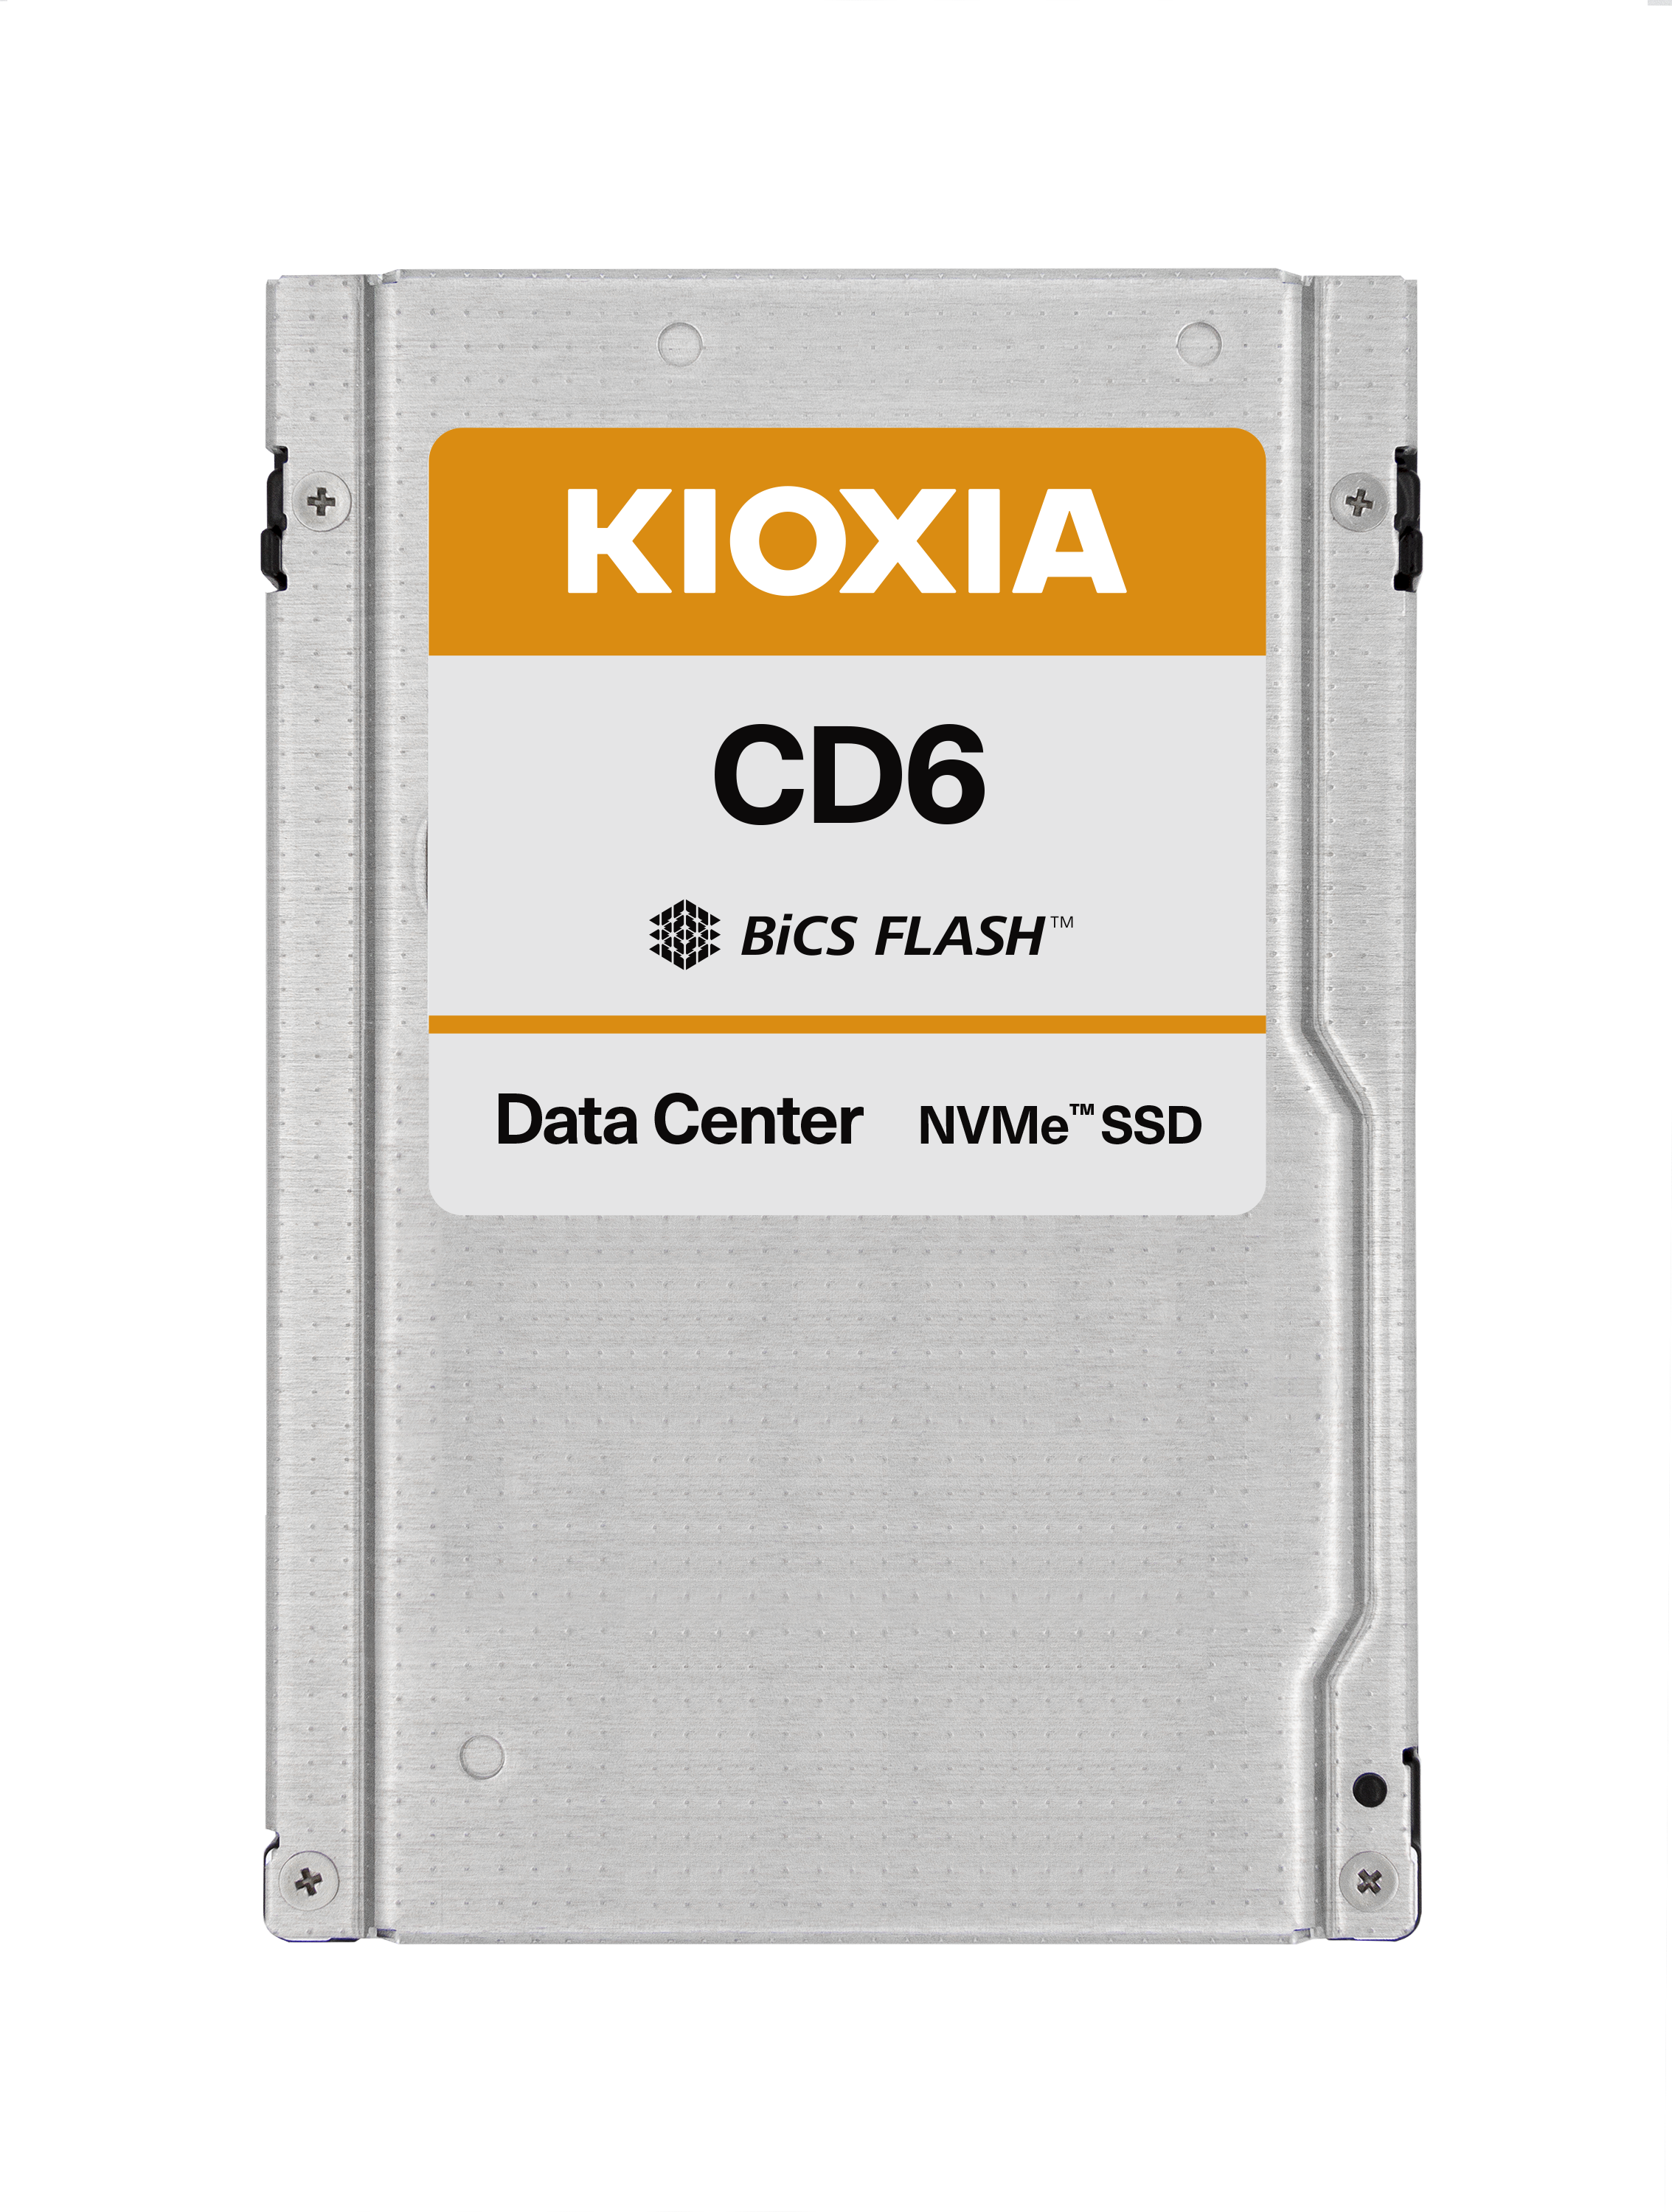 Kioxia CD6 KCD61VUL6T40 6.4TB PCIe Gen 4.0 x4 8GB/s 2.5" Mixed Use Solid State Drive